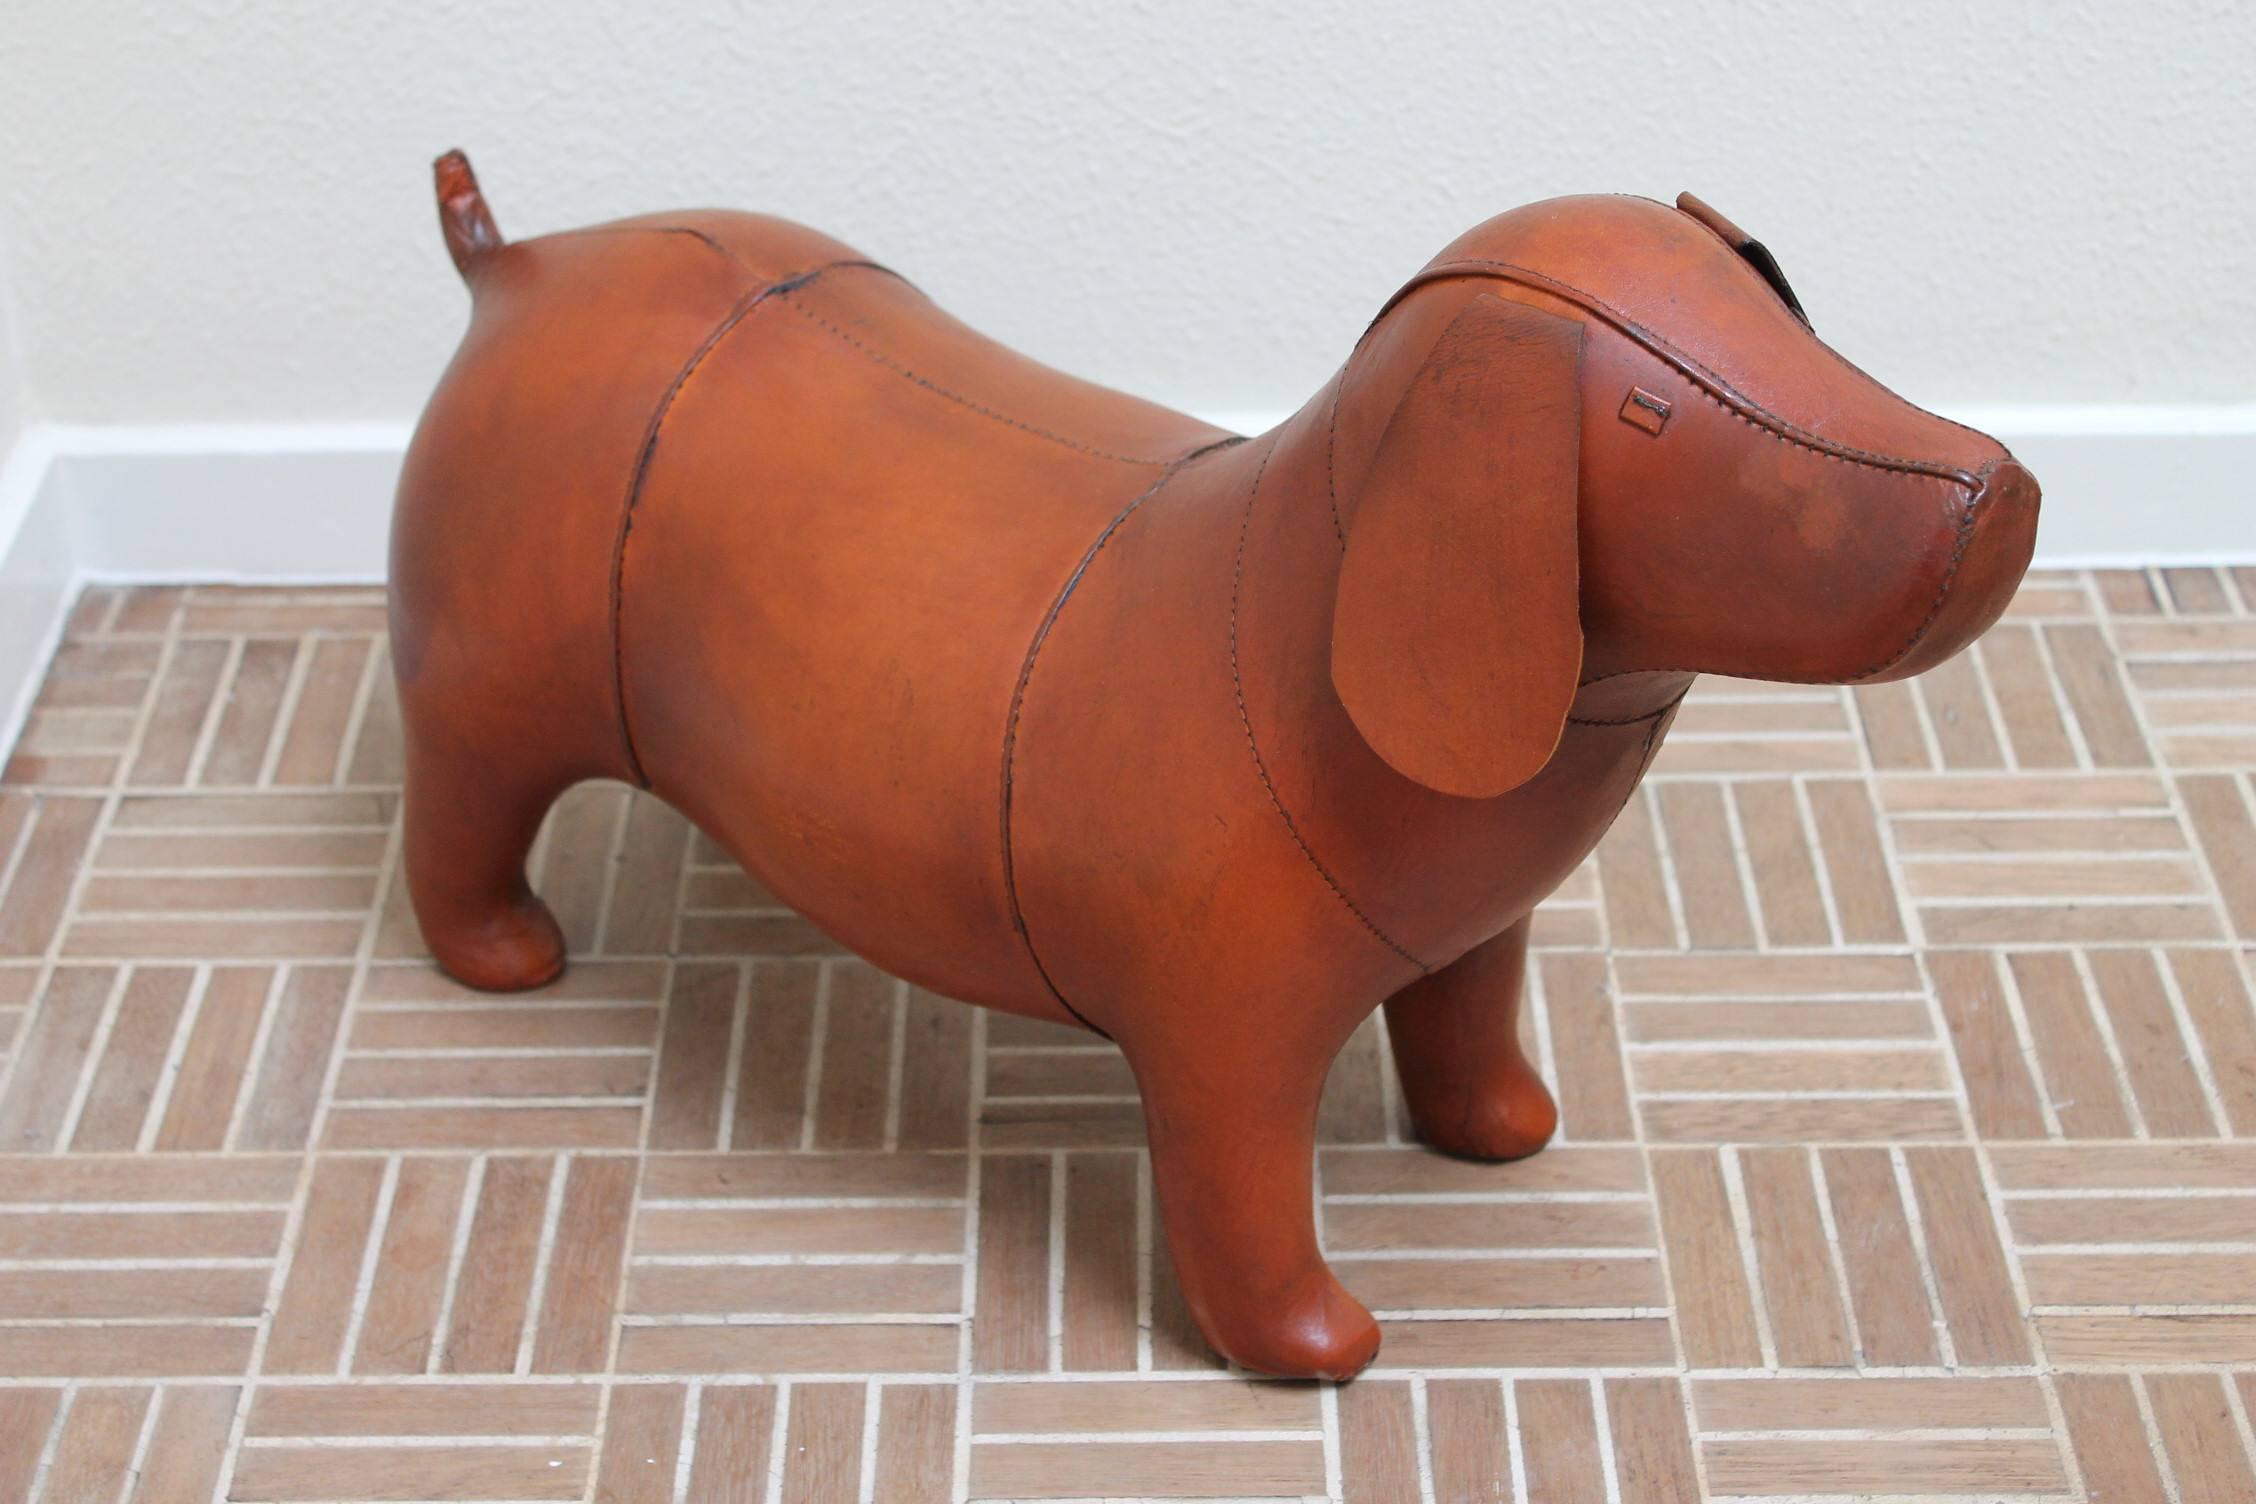 Large vintage Omersa leather dog footstool. 
Handmade in England.
Can be used as a foot tool, a great decorative interior object, childen's chair, desk accessorie.
Dog collectible - animal figurine. 
Great coloring. 
Excellent condition.